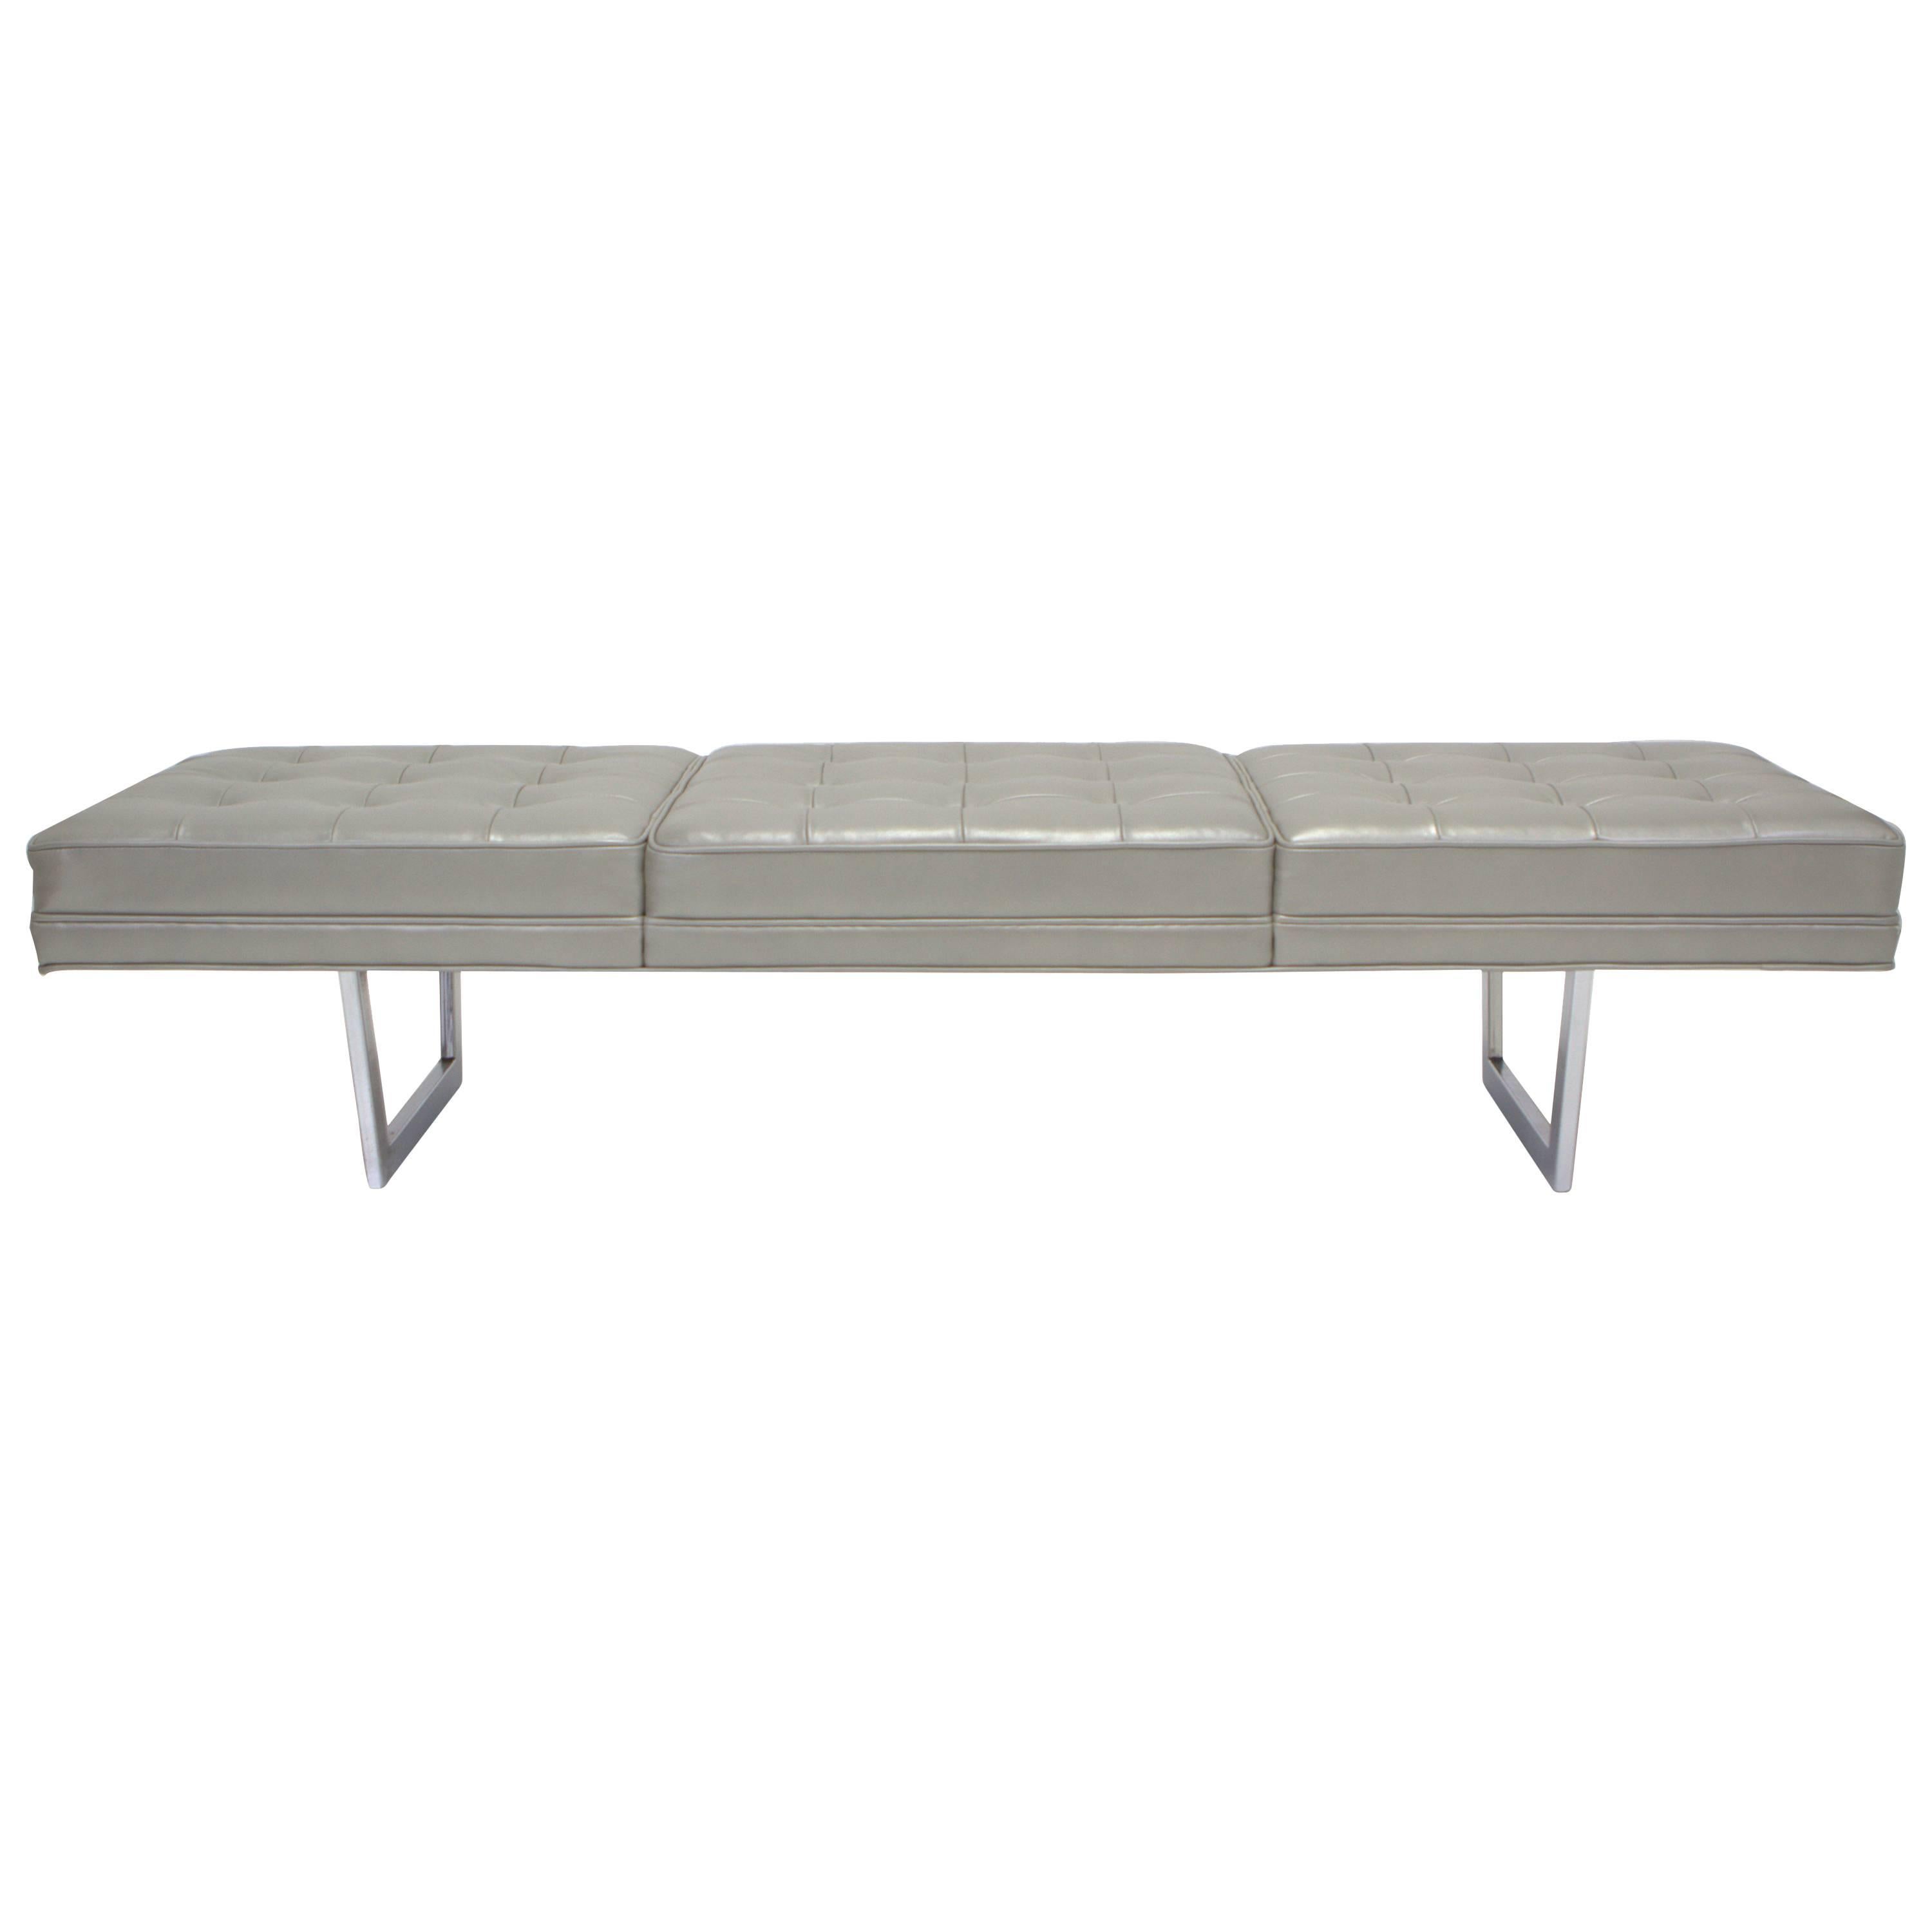 Milo Baughman Style Chrome and Metallic Leather Upholstered Bench